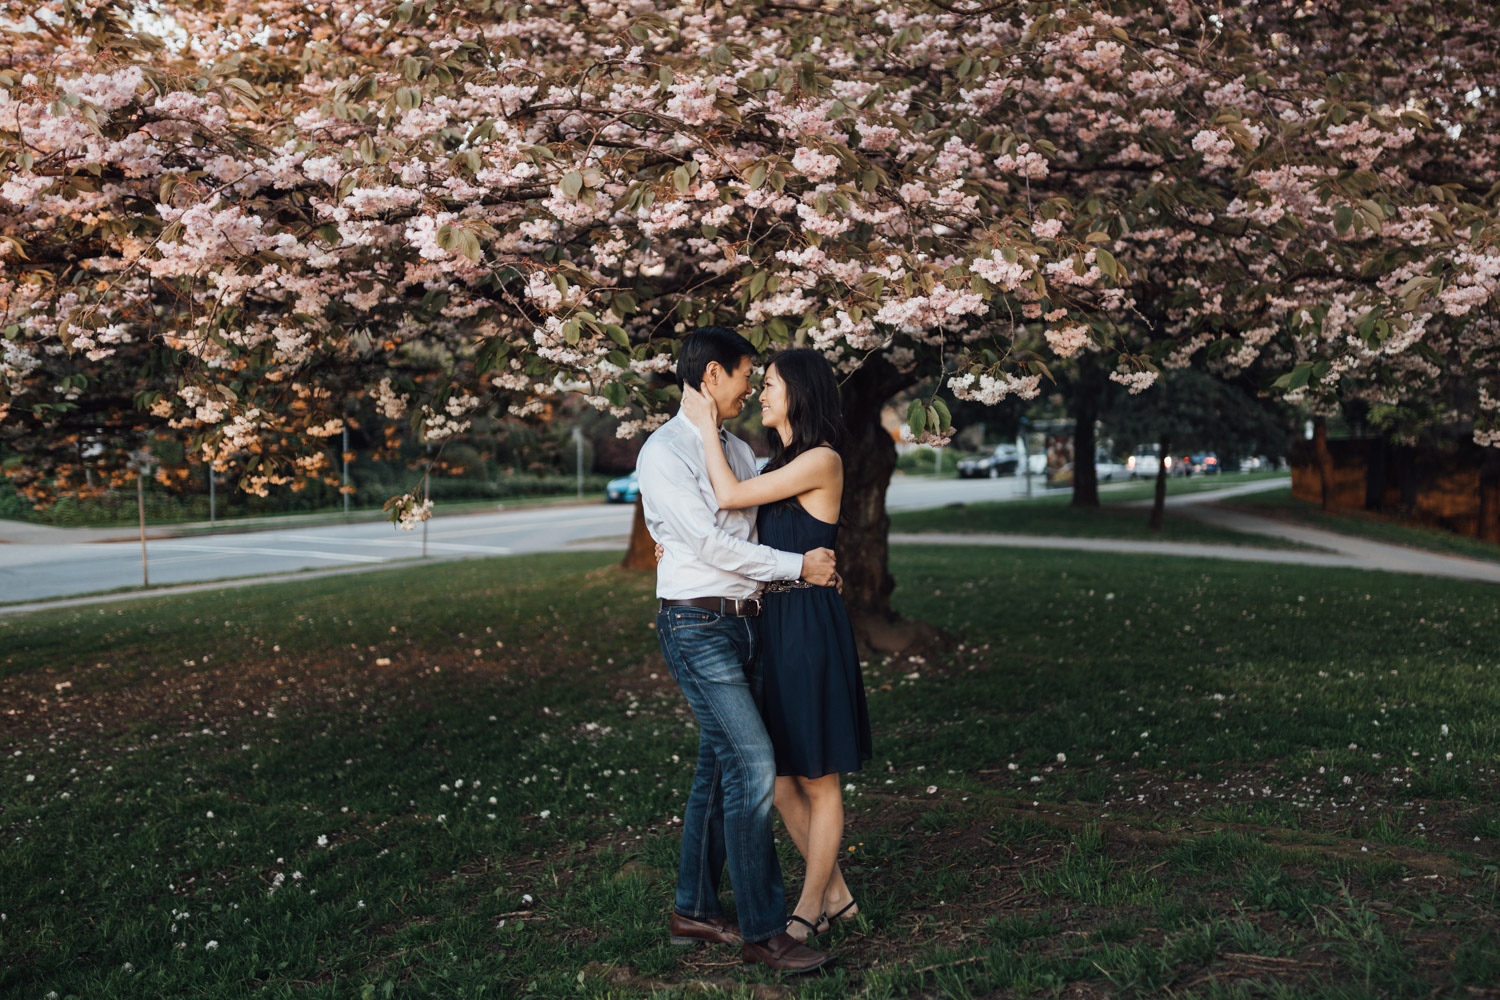 sunset beach engagement photography vancouver bc cherry blossom